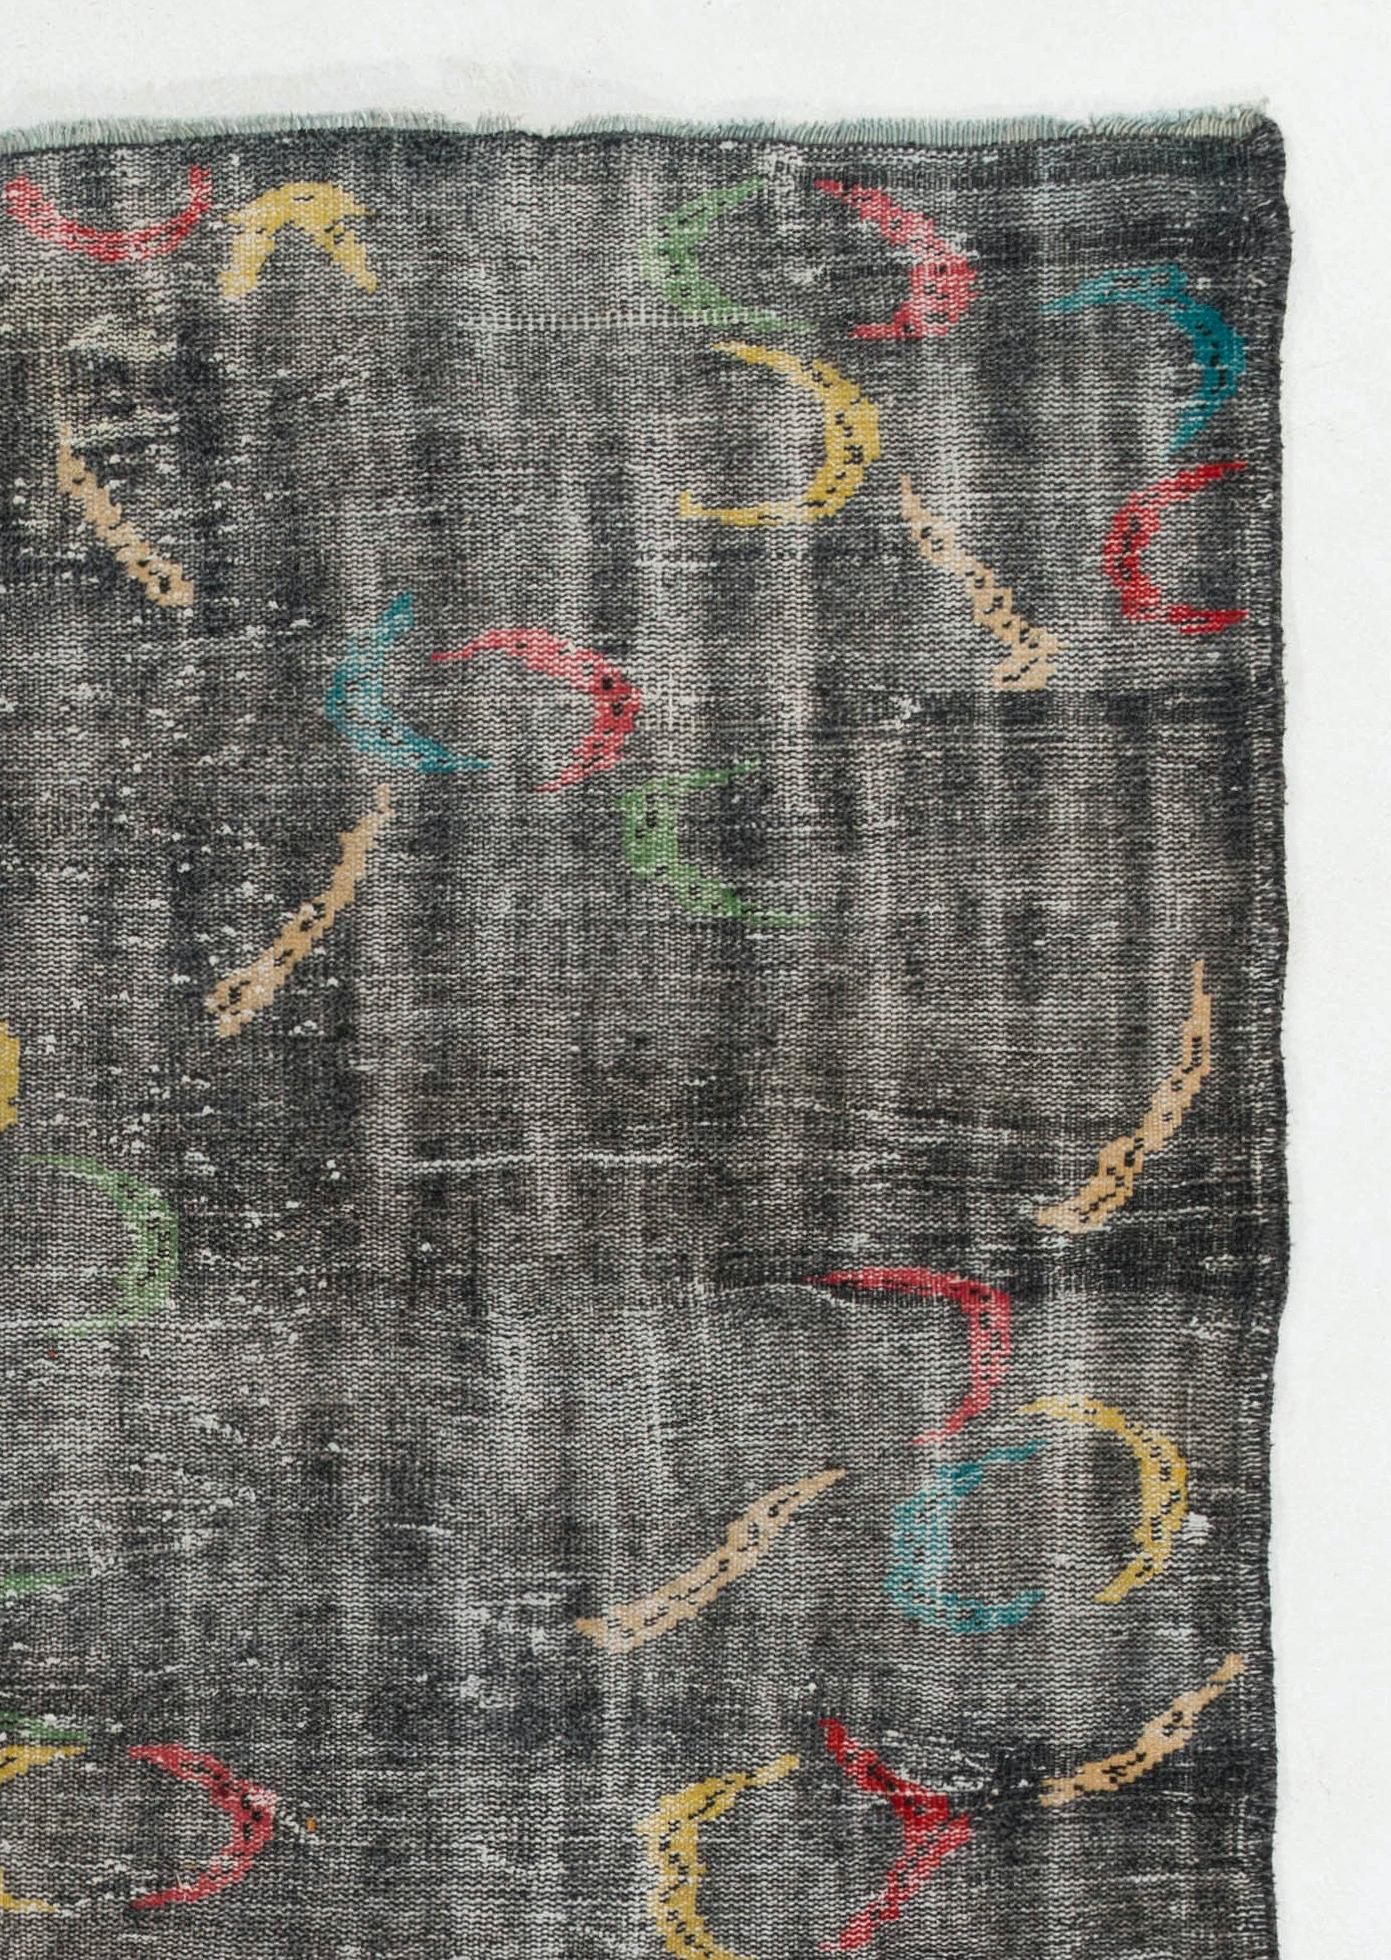 A finely hand-knotted rug made of wool on cotton foundation designed by Zeki Muren. The rug features a design of free-floating boomerang shaped figures in red, yellow, green, teal and beige against a charcoal gray background. 

Distressed rug in